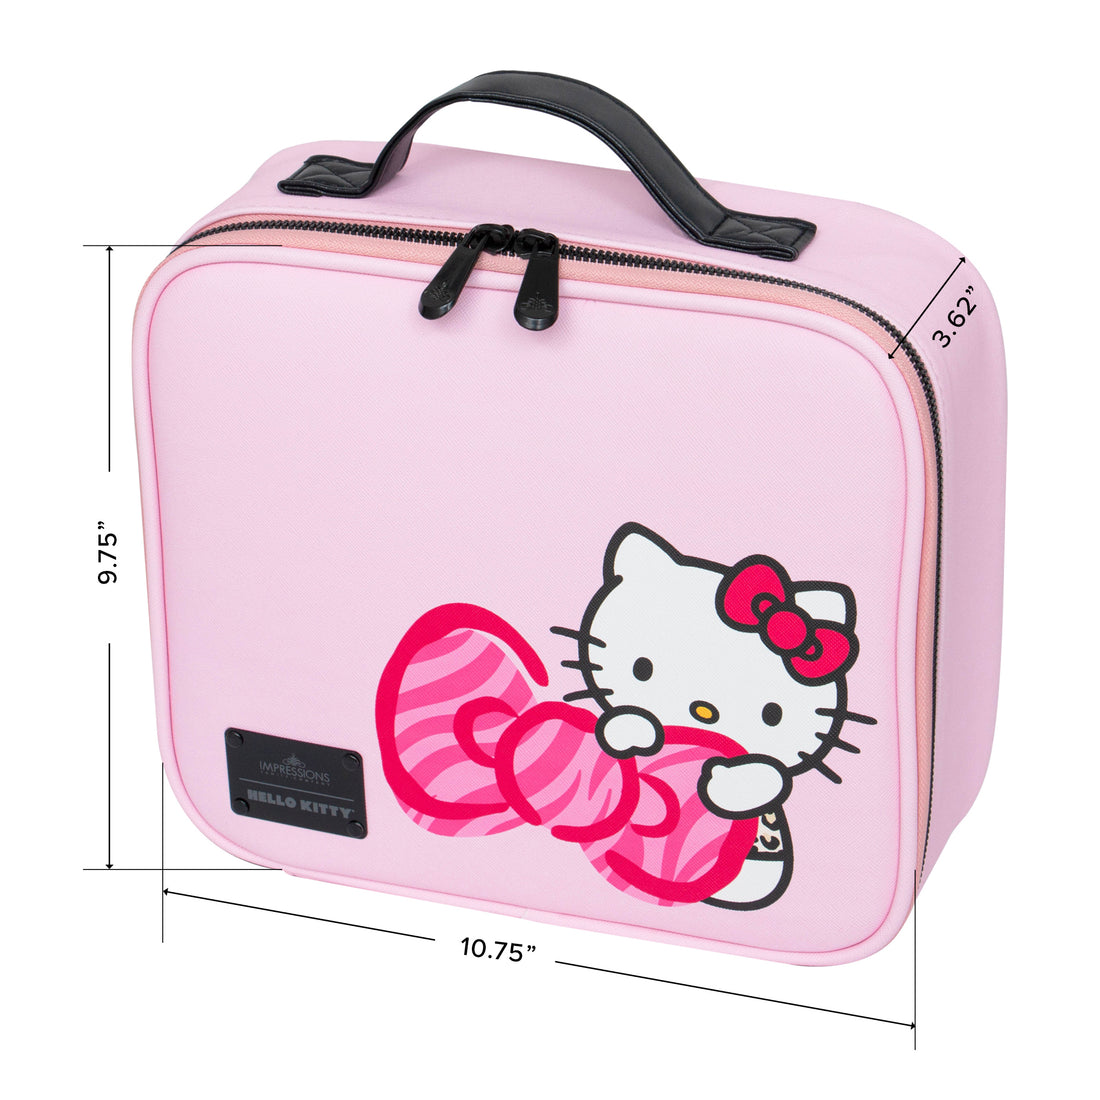 Impressions Vanity Hello Kitty Makeup Case with Full Size Mirror and Lighting, Makeup Organizer with Touch Sensor, Travel Jewelry Case with Makeup